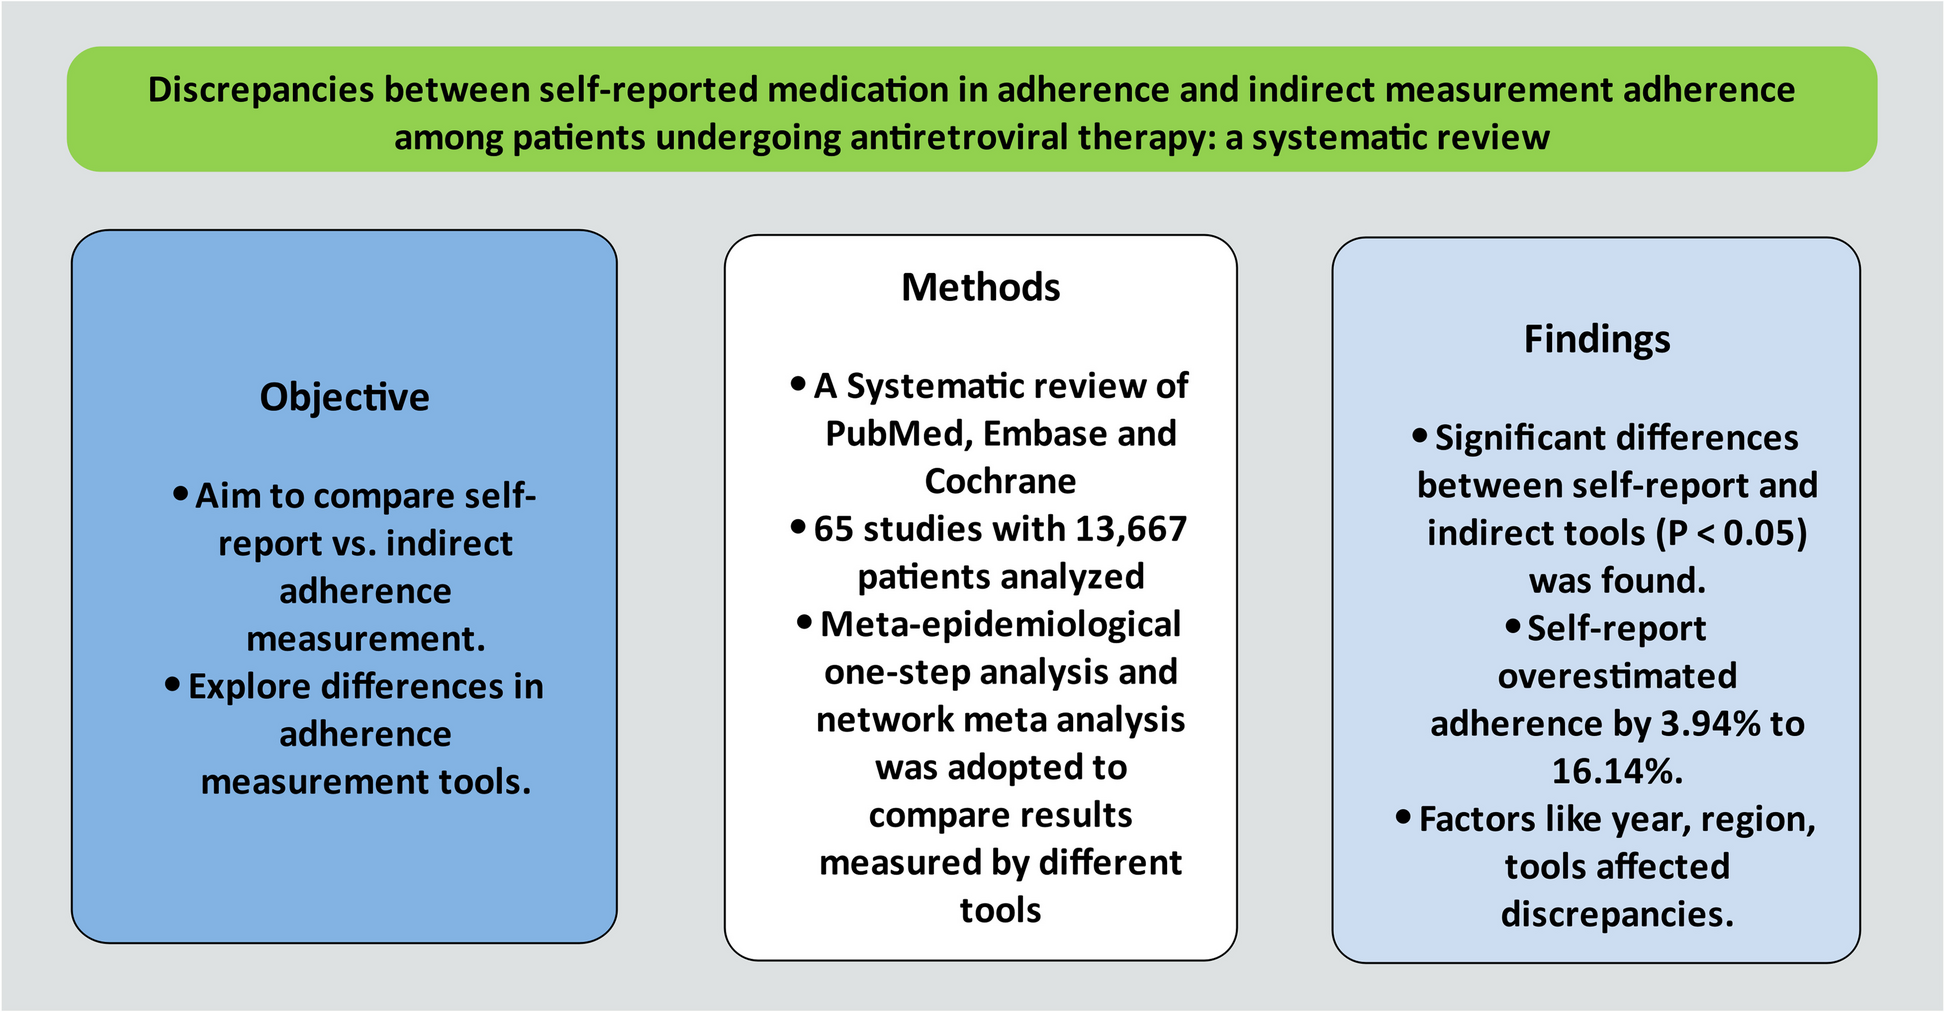 Discrepancies between self-reported medication in adherence and indirect measurement adherence among patients undergoing antiretroviral therapy: a systematic review